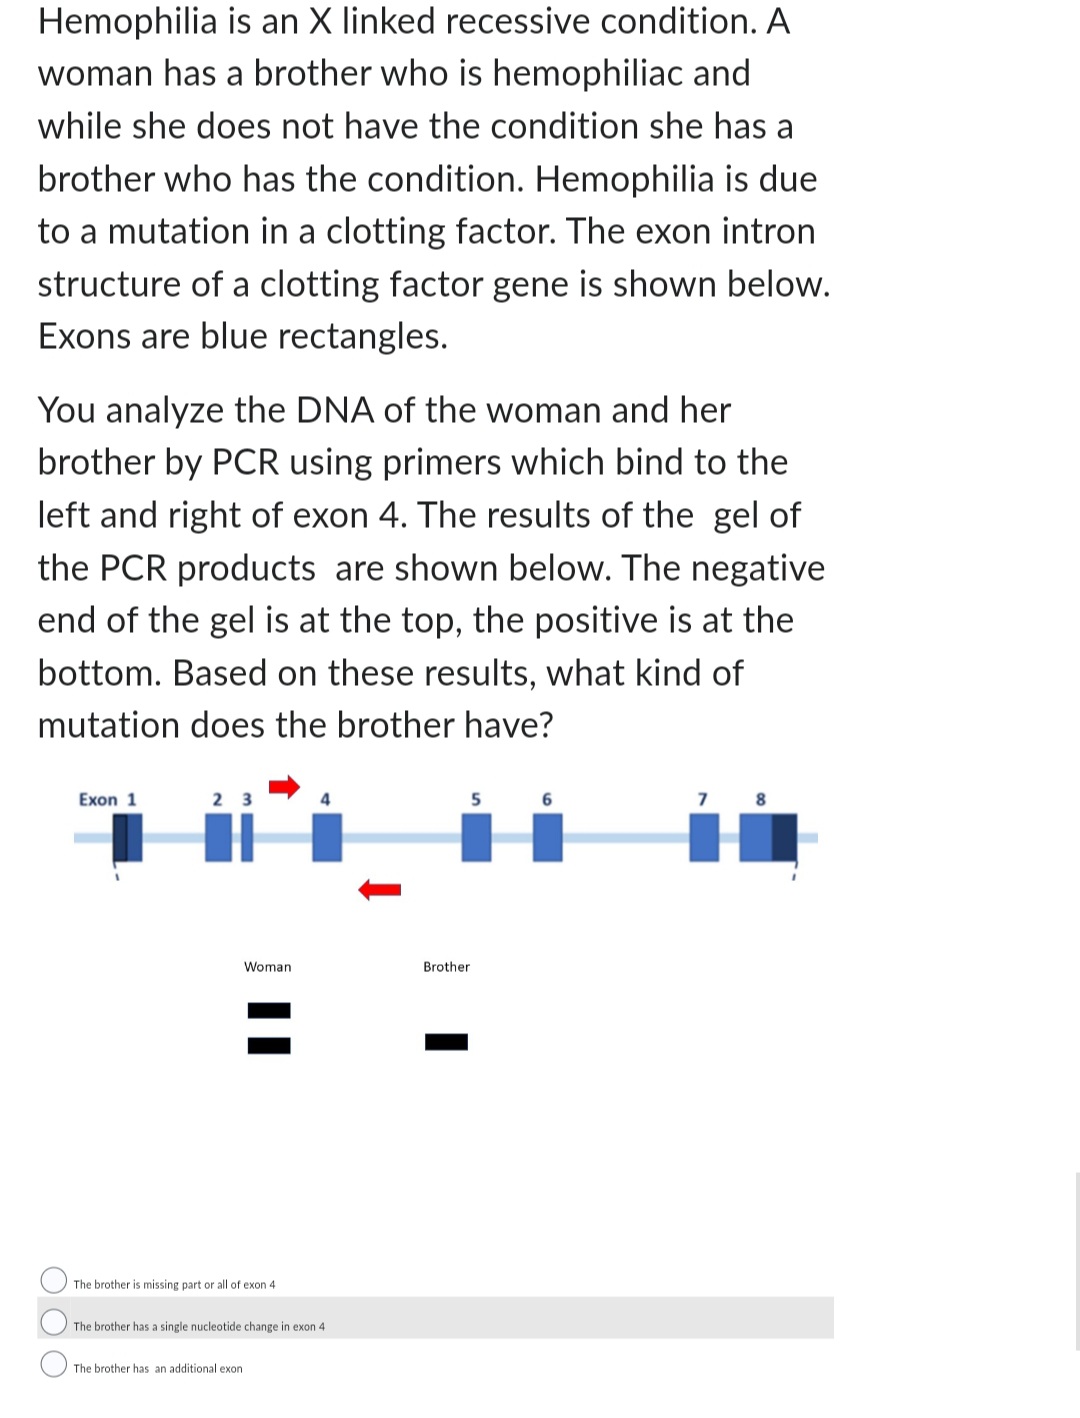 Hemophilia is an X linked recessive condition. A
woman has a brother who is hemophiliac and
while she does not have the condition she has a
brother who has the condition. Hemophilia is due
to a mutation in a clotting factor. The exon intron
structure of a clotting factor gene is shown below.
Exons are blue rectangles.
You analyze the DNA of the woman and her
brother by PCR using primers which bind to the
left and right of exon 4. The results of the gel of
the PCR products are shown below. The negative
end of the gel is at the top, the positive is at the
bottom. Based on these results, what kind of
mutation does the brother have?
Exon 1
Woman
The brother is missing part or all of exon 4
The brother has a single nucleotide change in exon 4
The brother has an additional exon
5
Brother
6
7
8